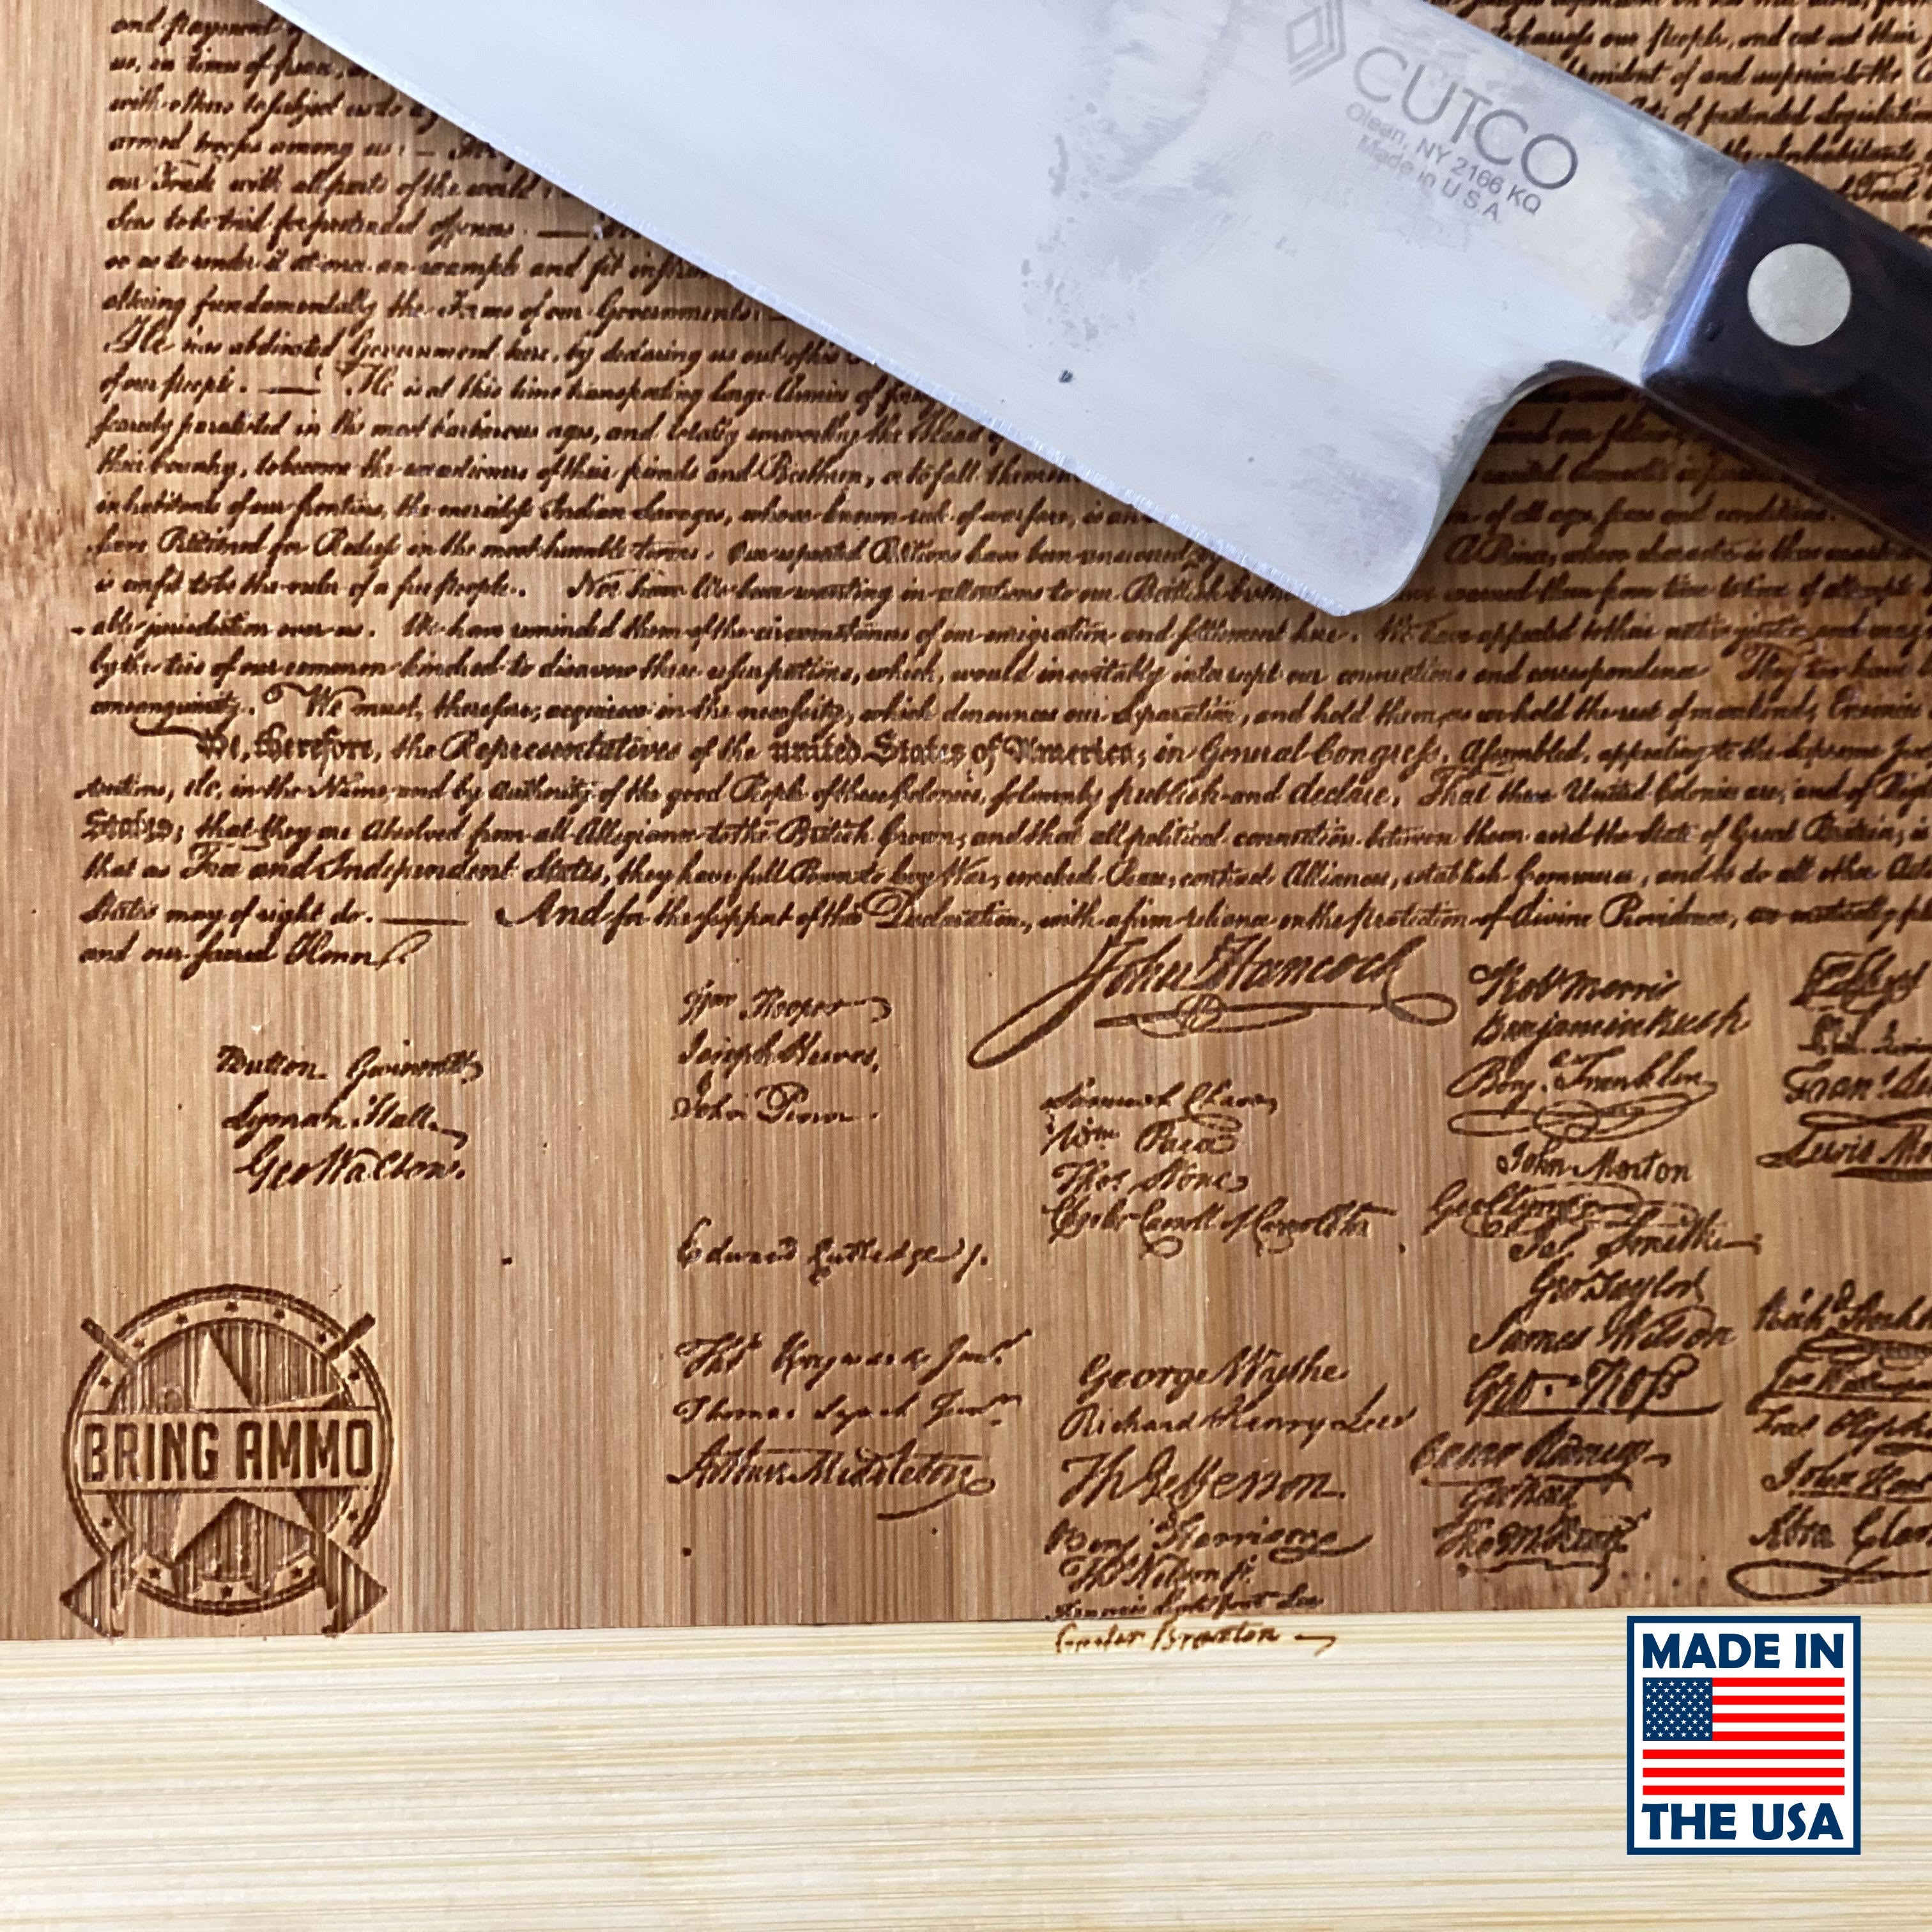 Declaration of Independence Laser Engraved Real Bamboo Wood Cutting Board - MADE IN THE USA! Great Gift Idea! Wood Cutting Boards 